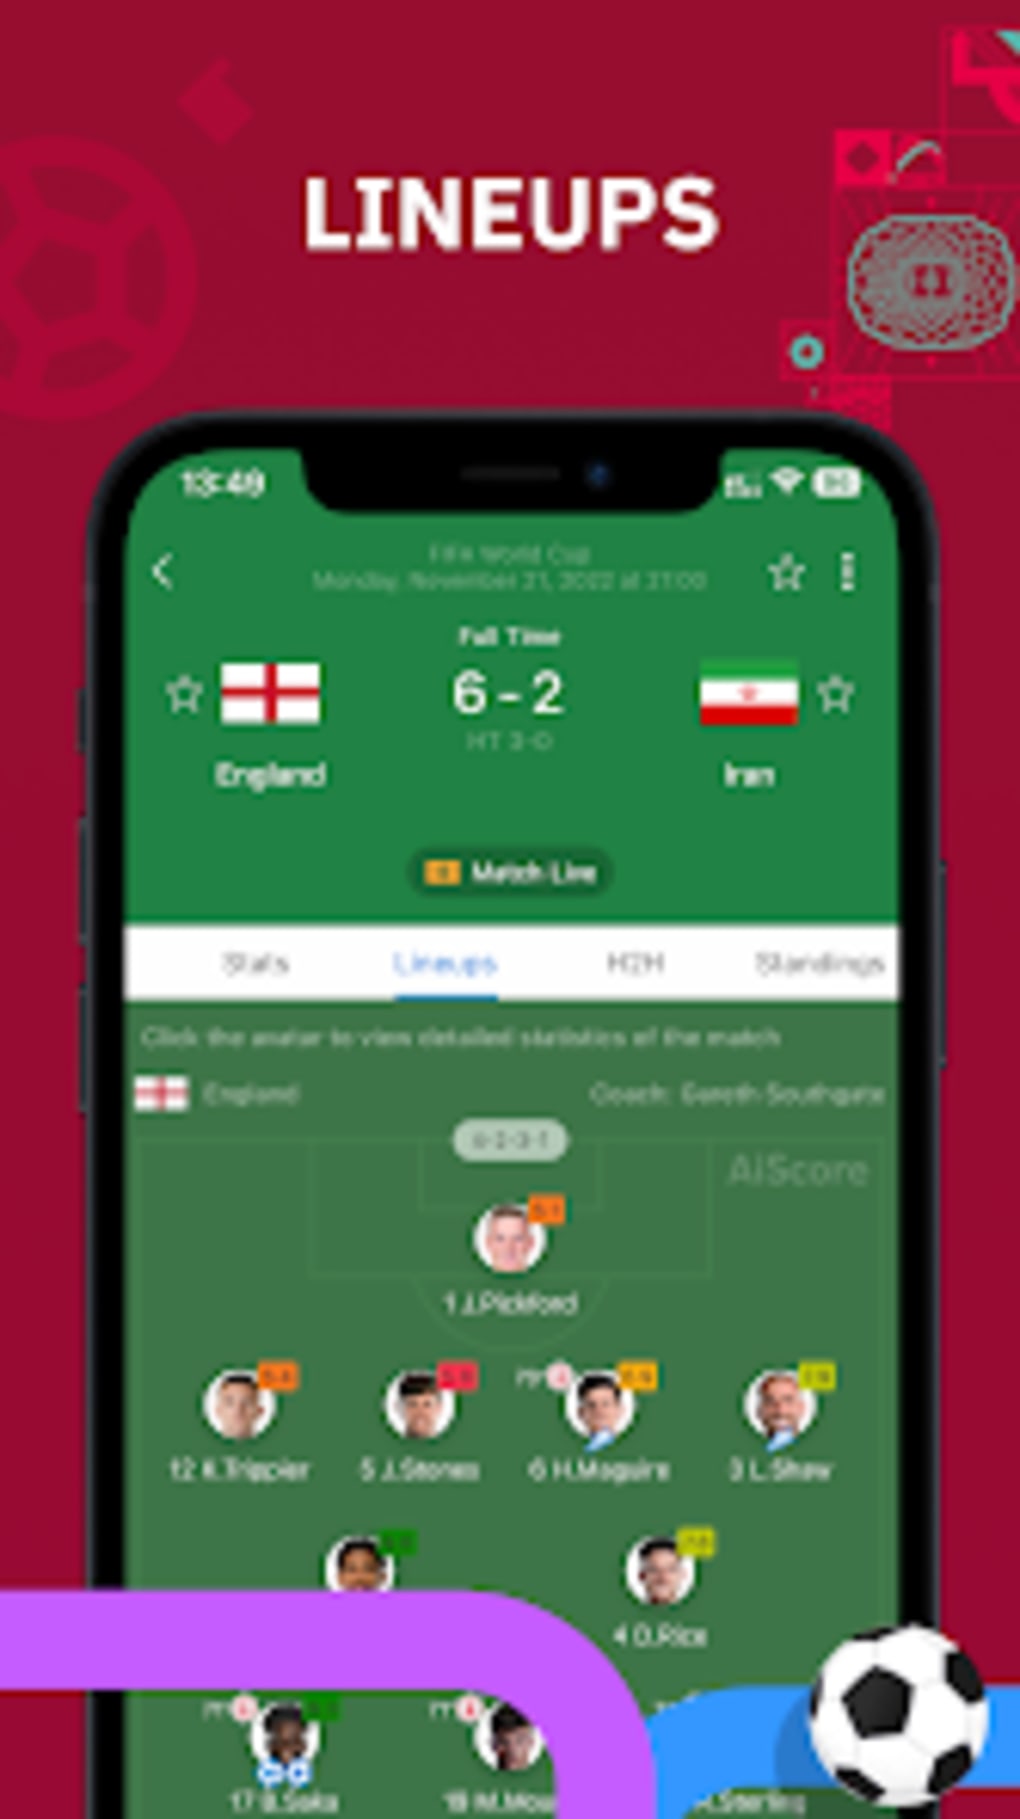 AiScore - Live Scores for Football Basketball APK for Android